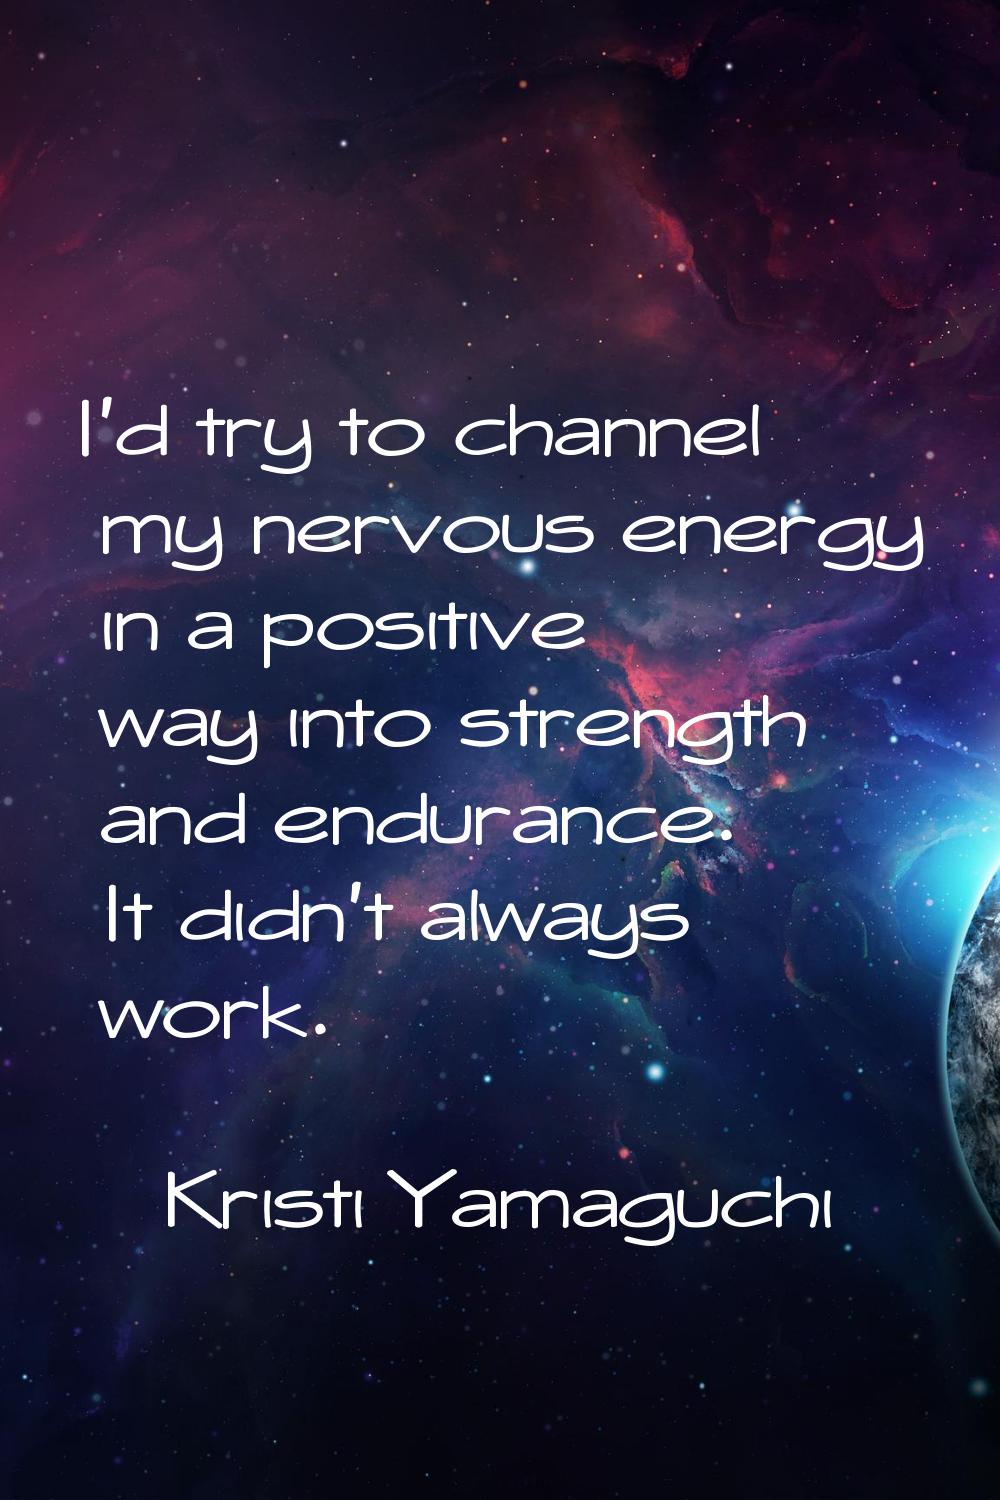 I'd try to channel my nervous energy in a positive way into strength and endurance. It didn't alway